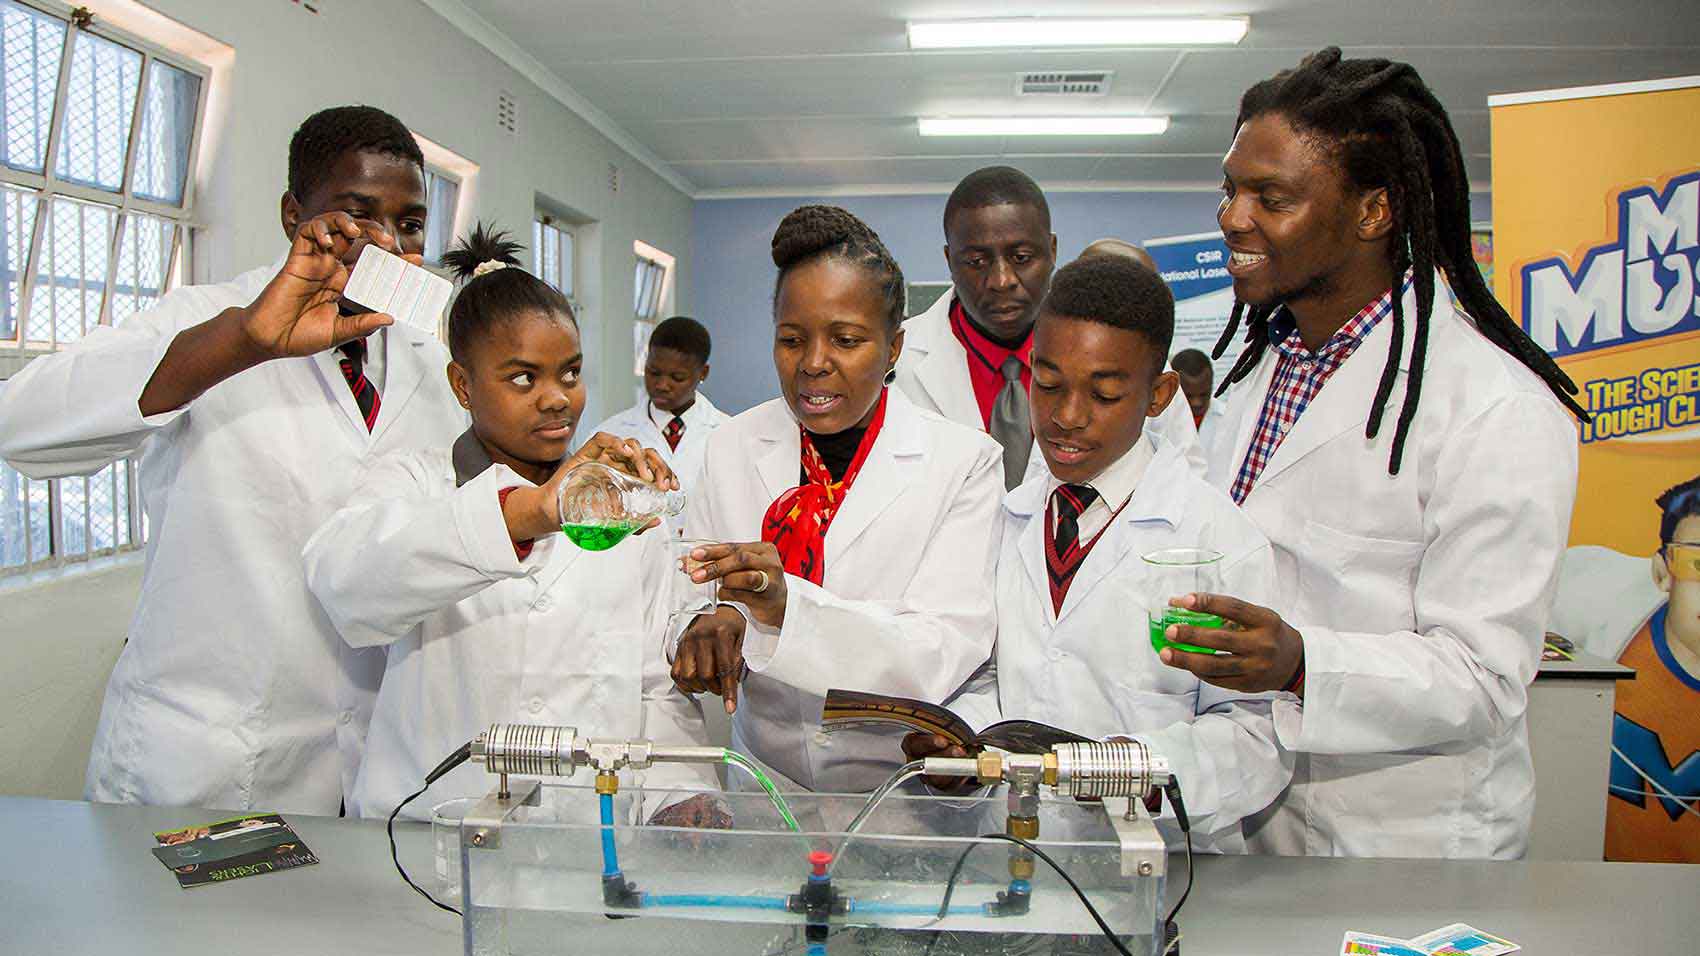 SC Johnson’s corporate philanthropy programme provides science lab and equipment for students.